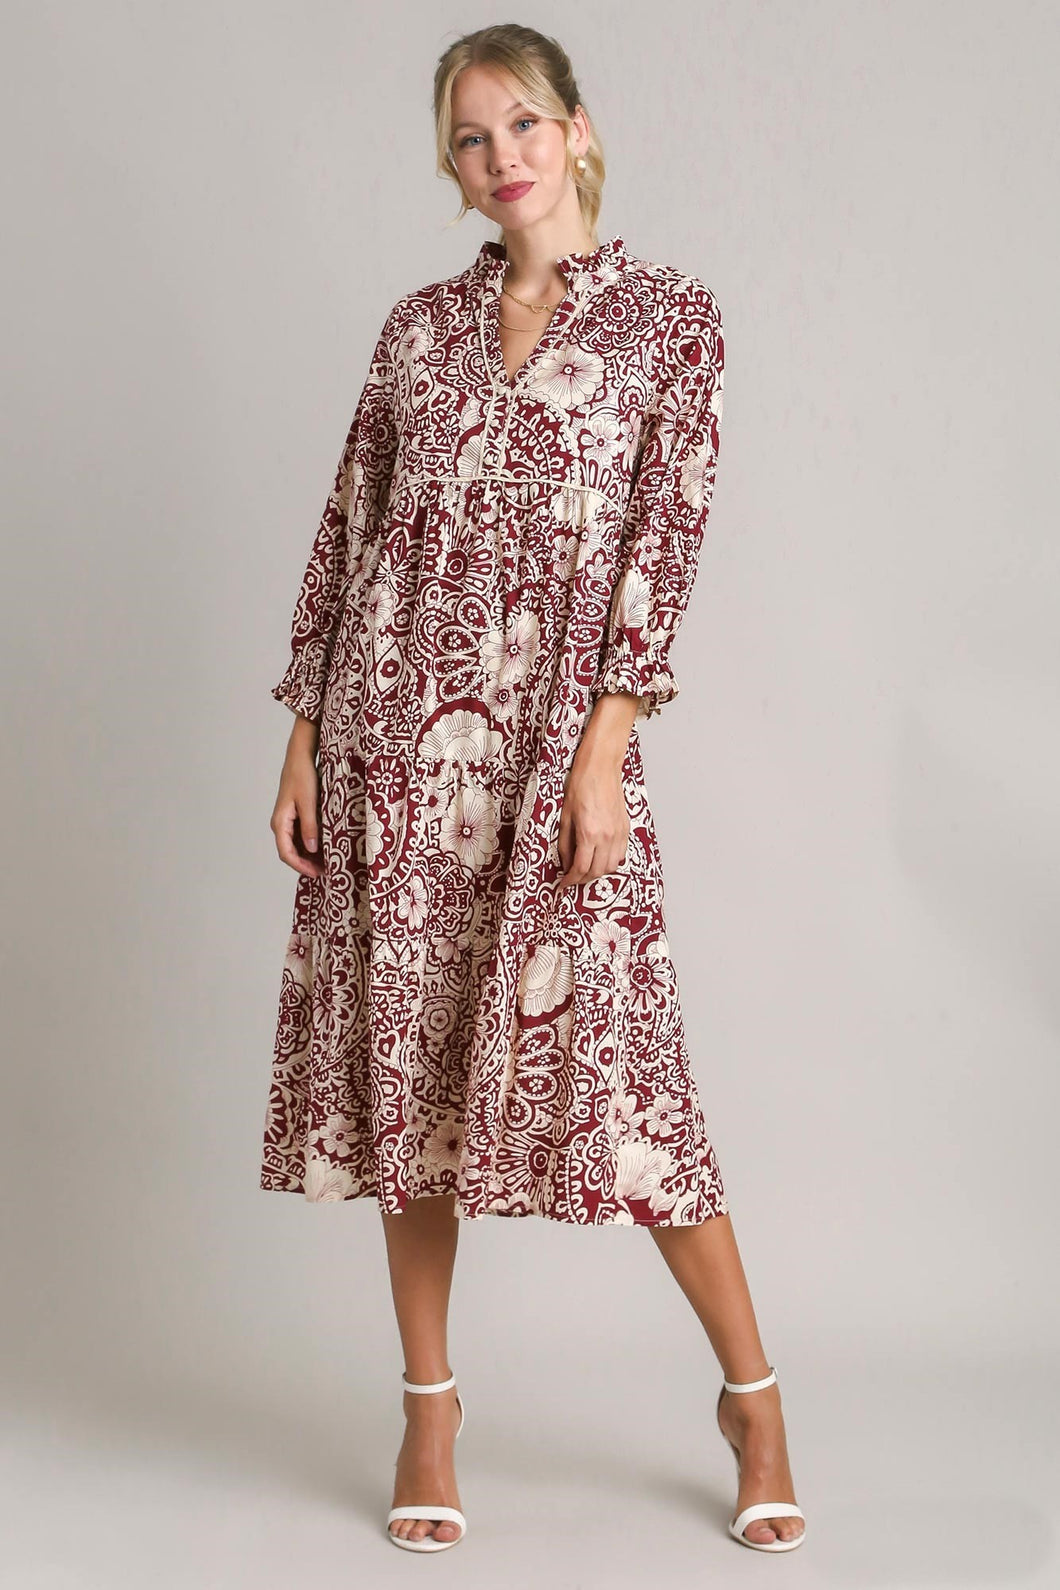 Umgee Two Toned Floral Midi Dress with Piping Details in Sangria Mix Dresses Umgee   